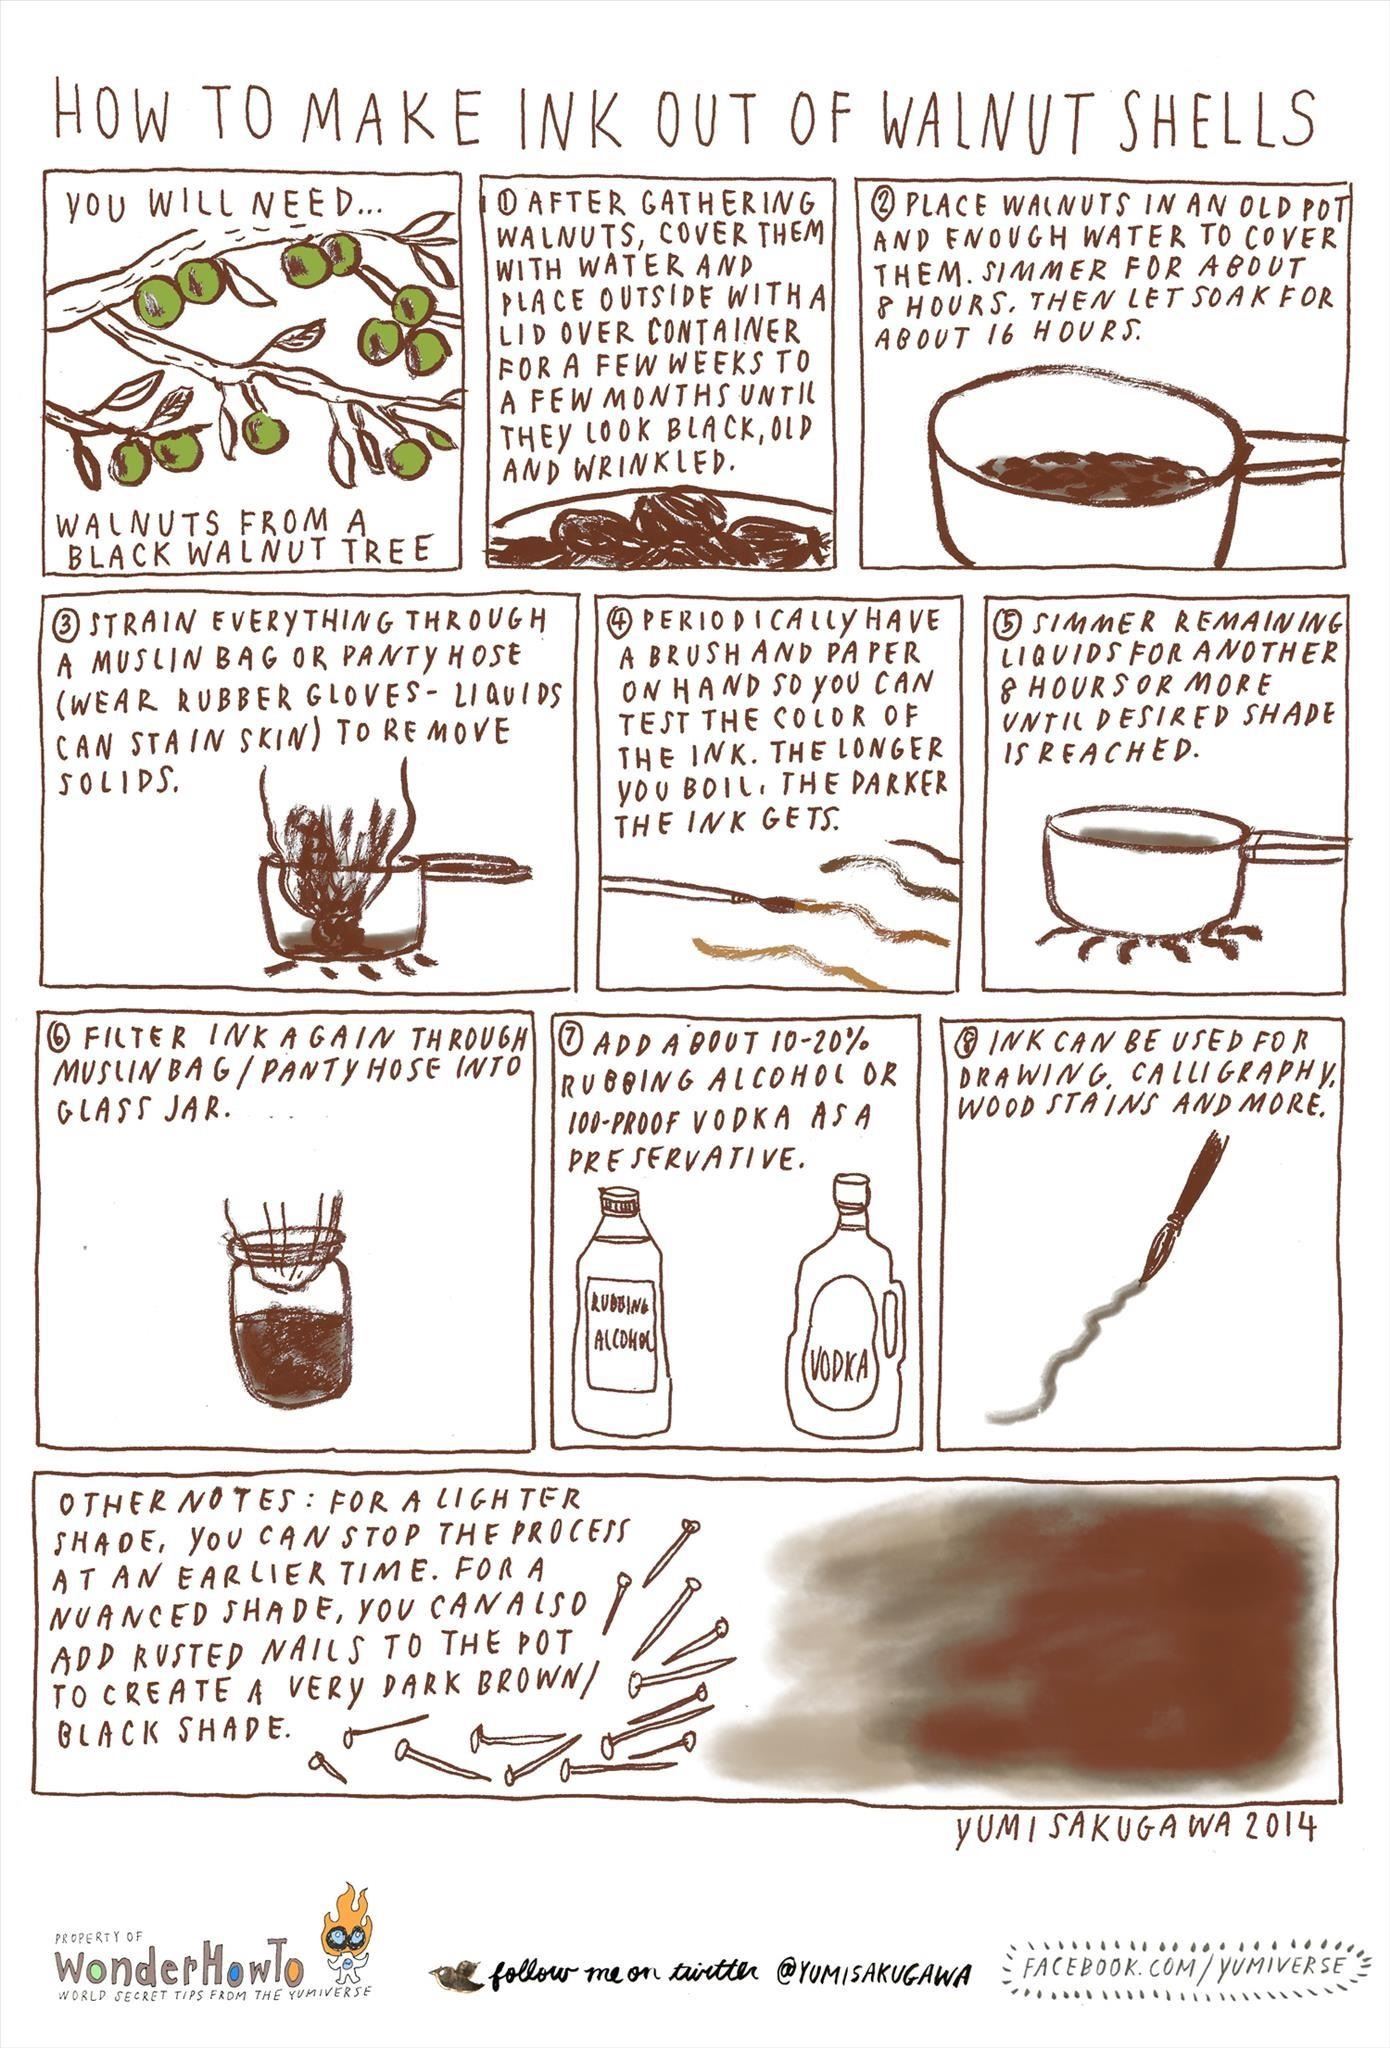 How to Make Your Own Ink Out of Walnut Shells